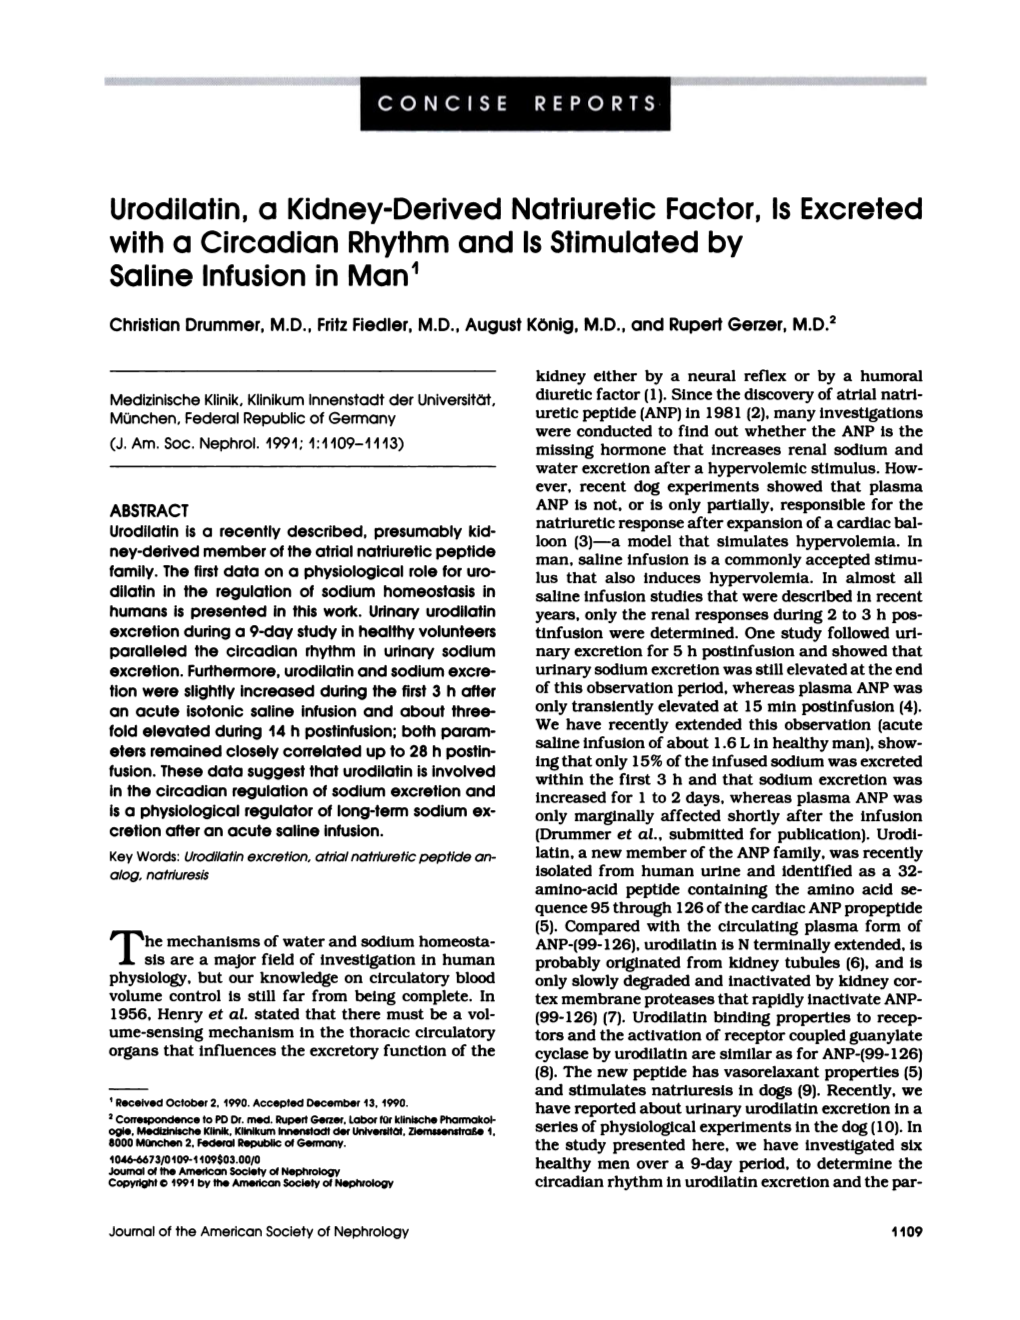 Urodilatin, a Kidney-Derived Natriuretic Factor, Is Excreted with a Circadian Rhythm and Is Stimulated by Saline Infusion in Man1